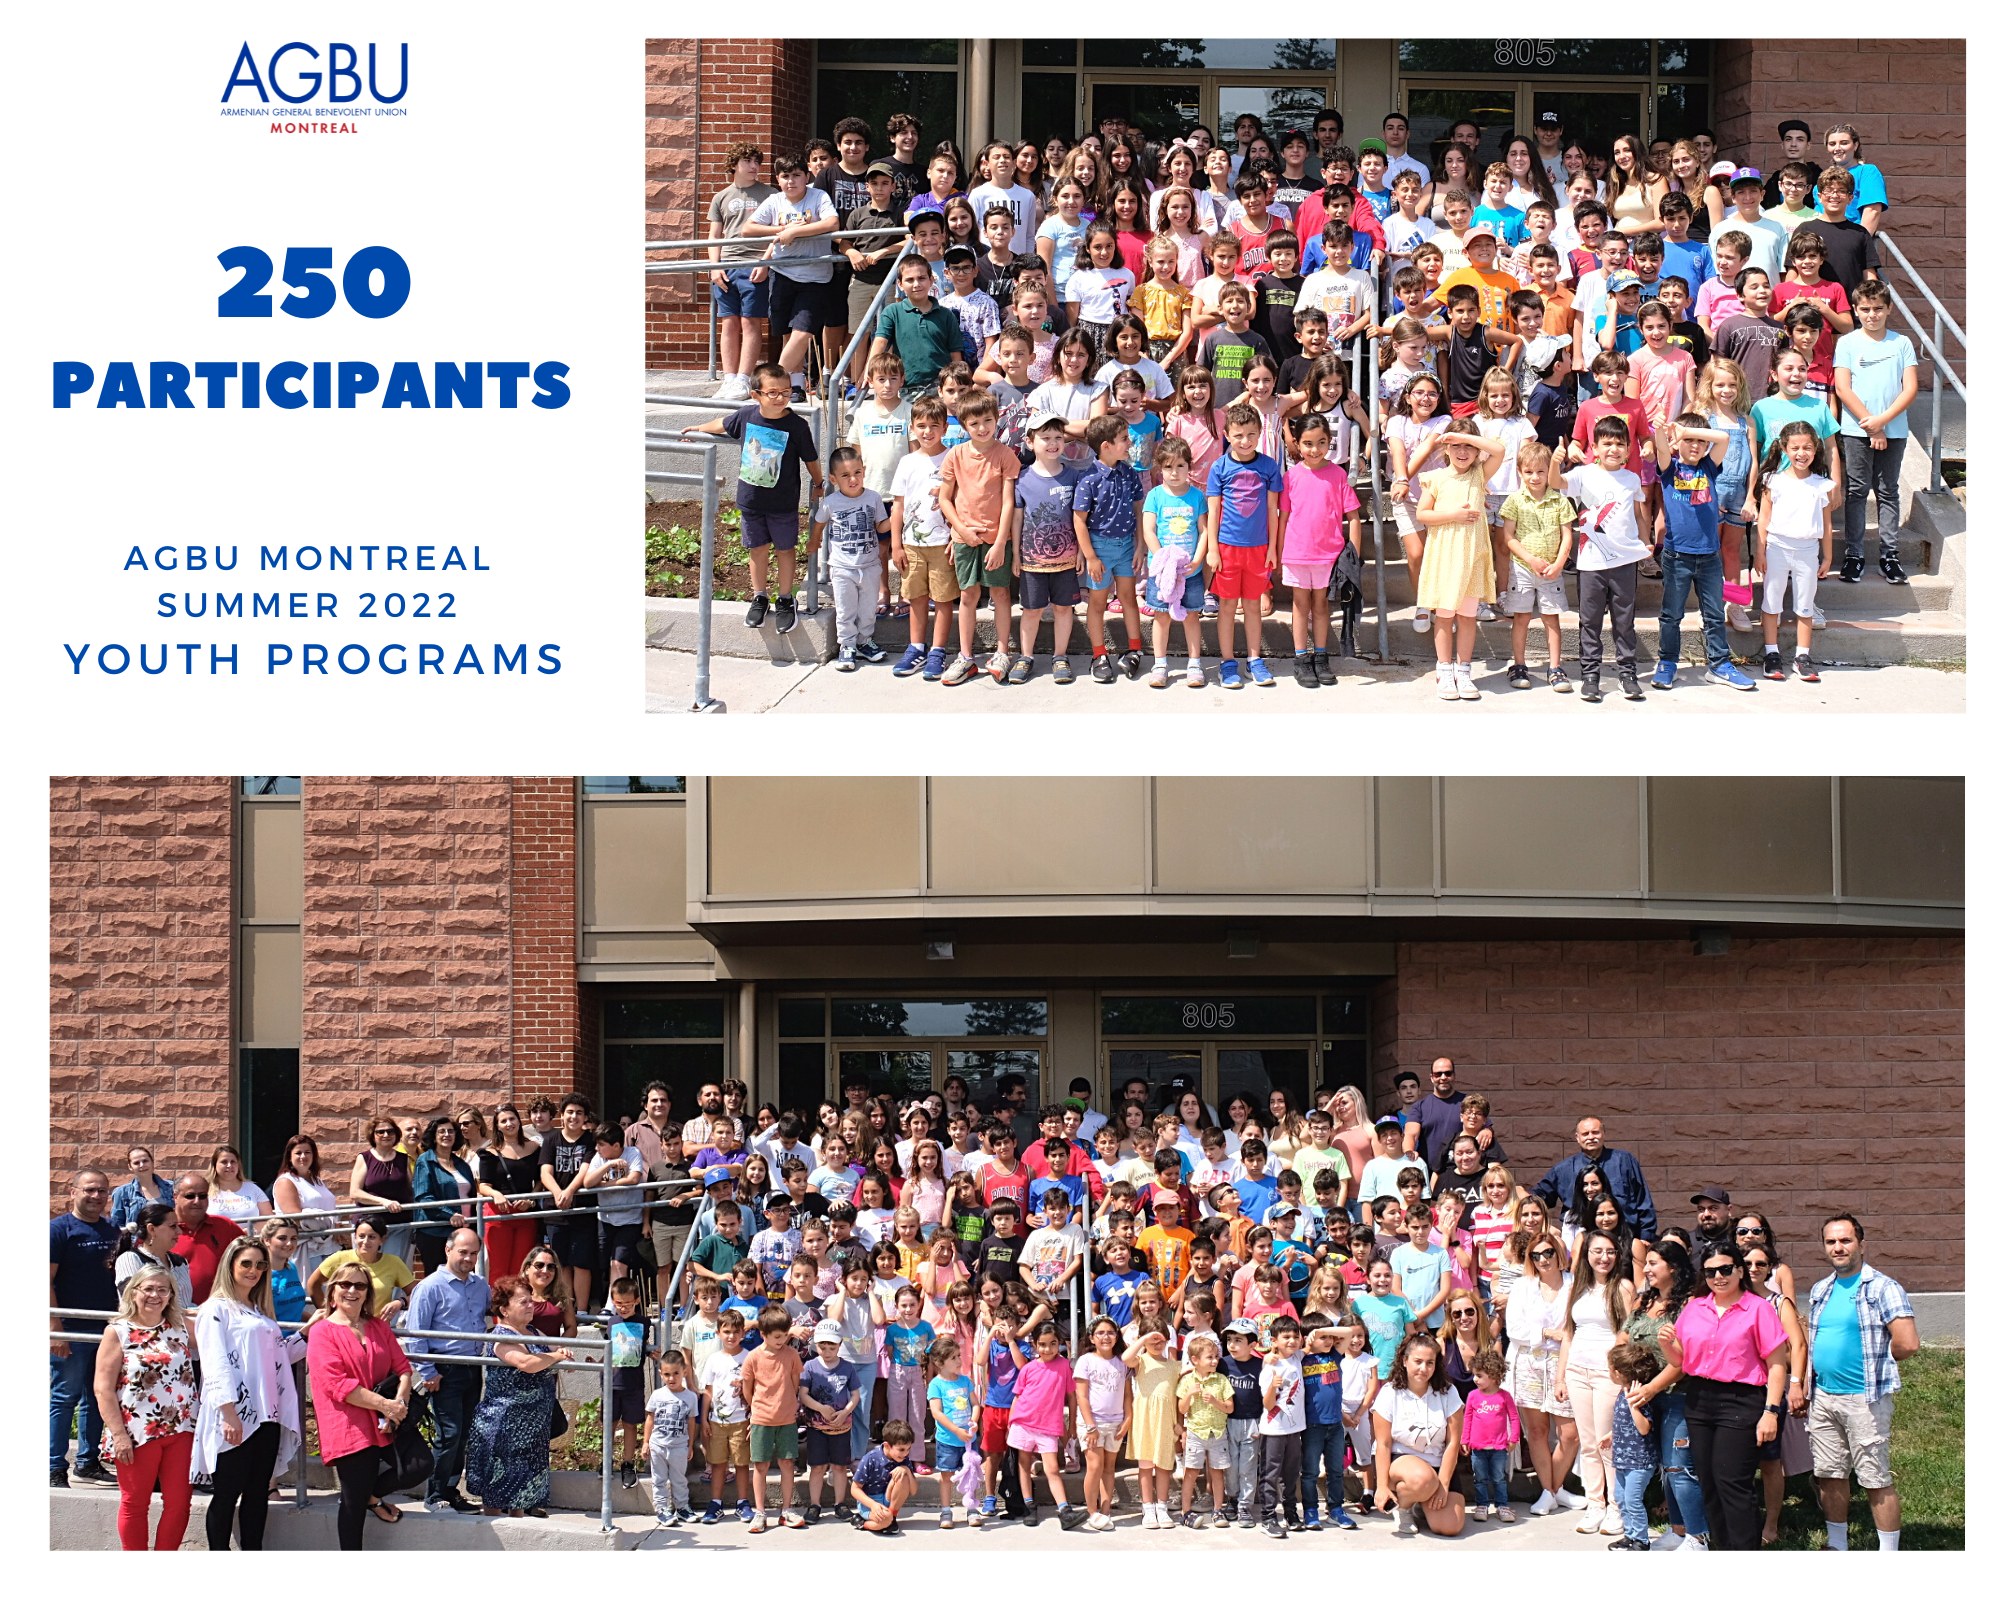 250 participants of AGBU’s Summer Youth Programs in Montreal